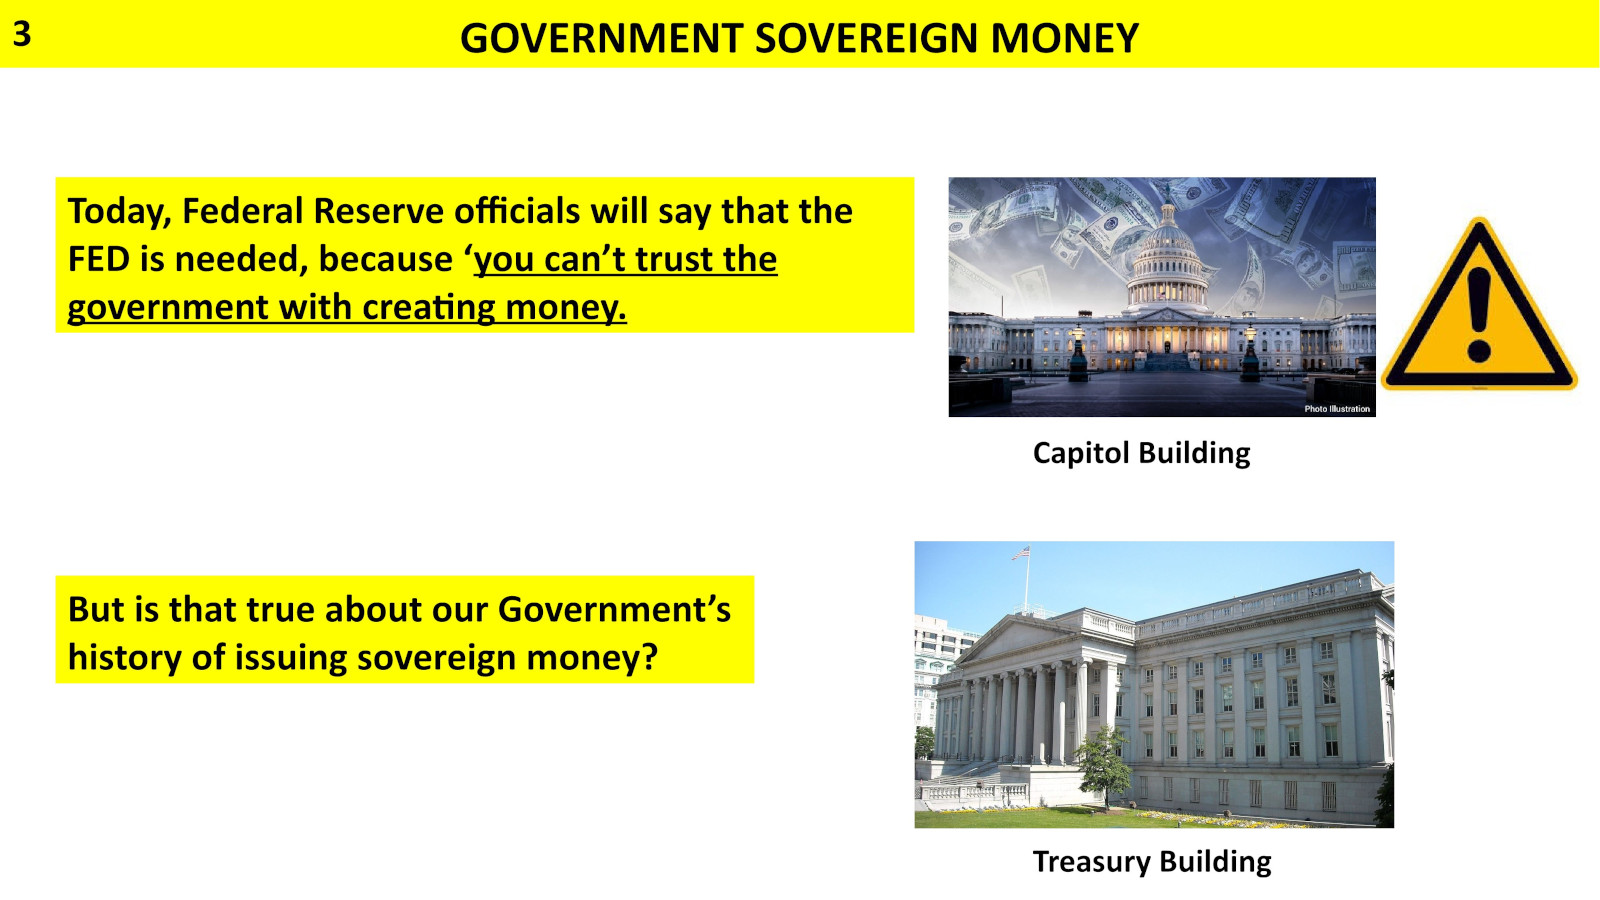 Banks say one cannot trust government to issue money, but is that valid?